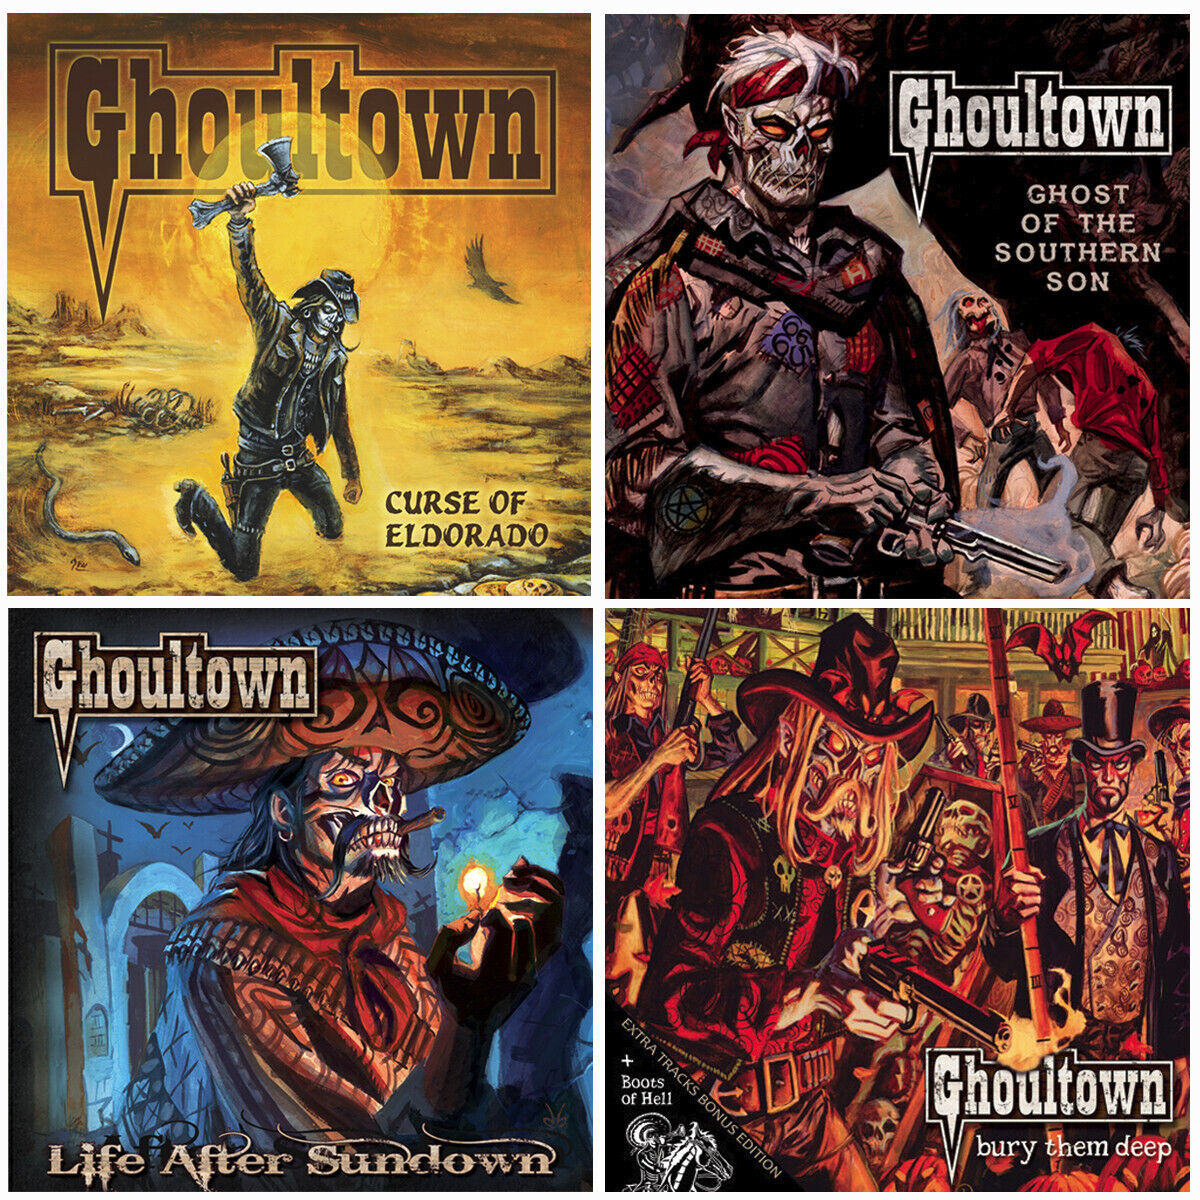 Ghoultown - 4 Pack CD Special - 4 albums for one low price